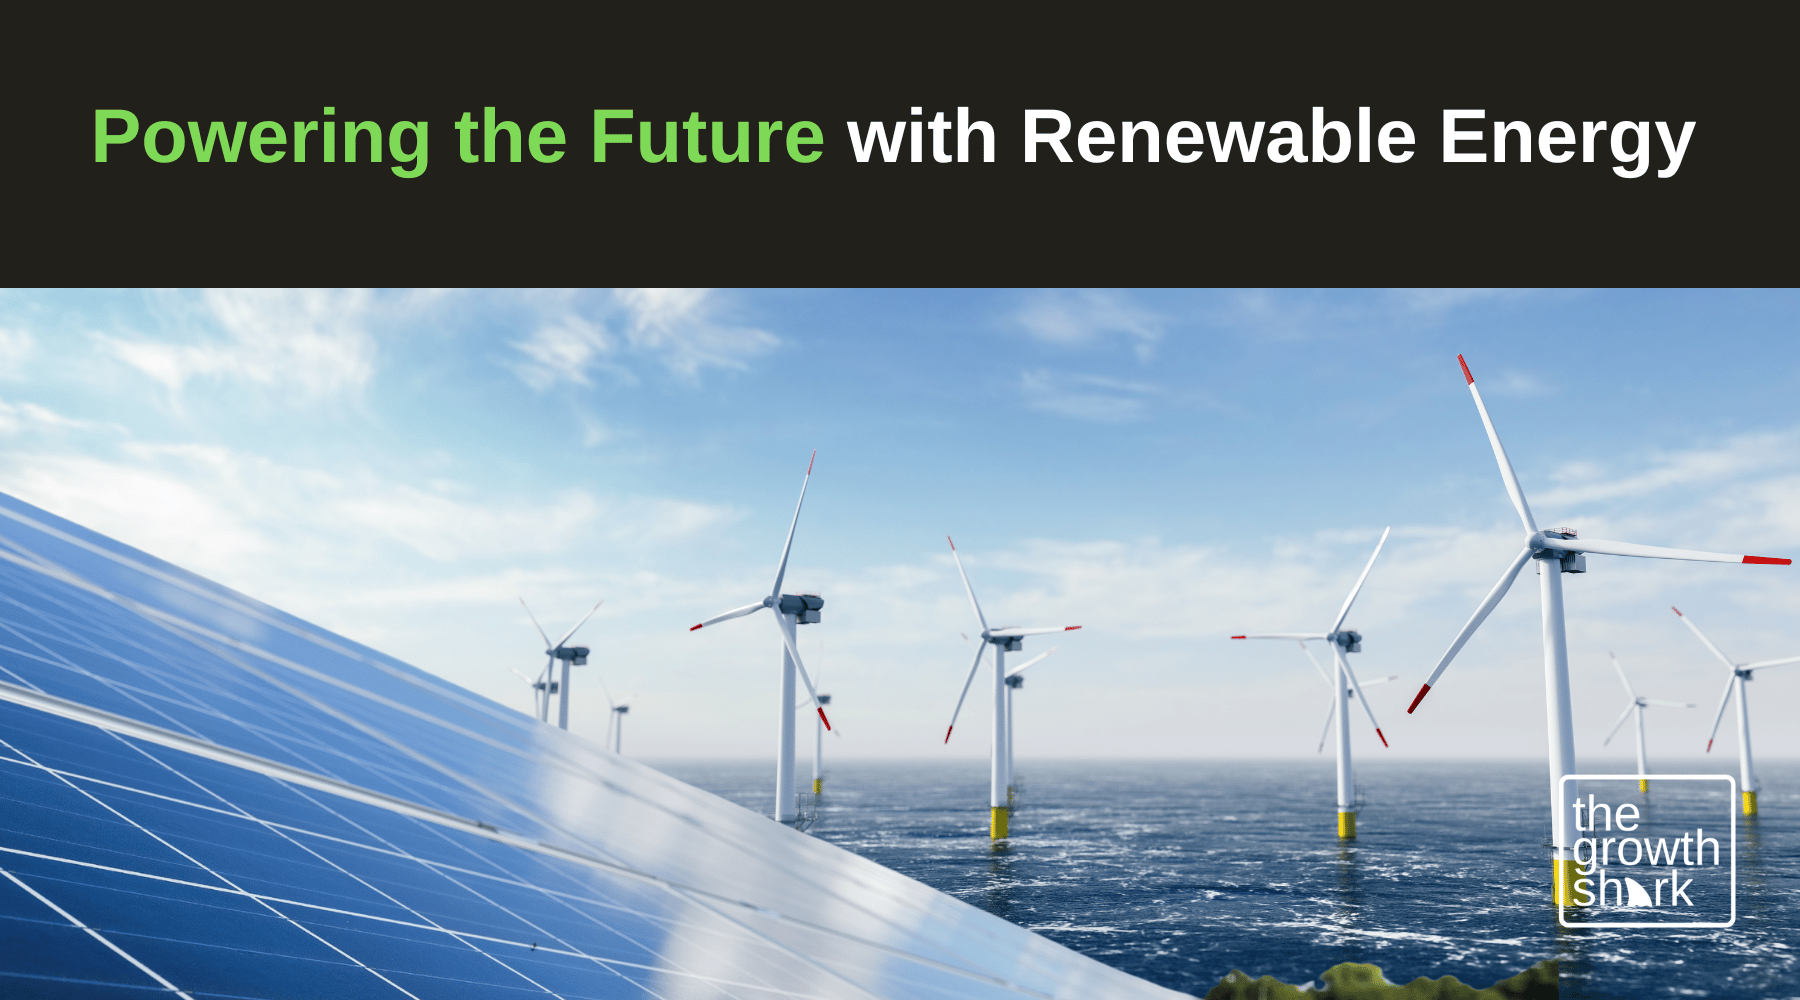 Powering the Future with Renewable Energy